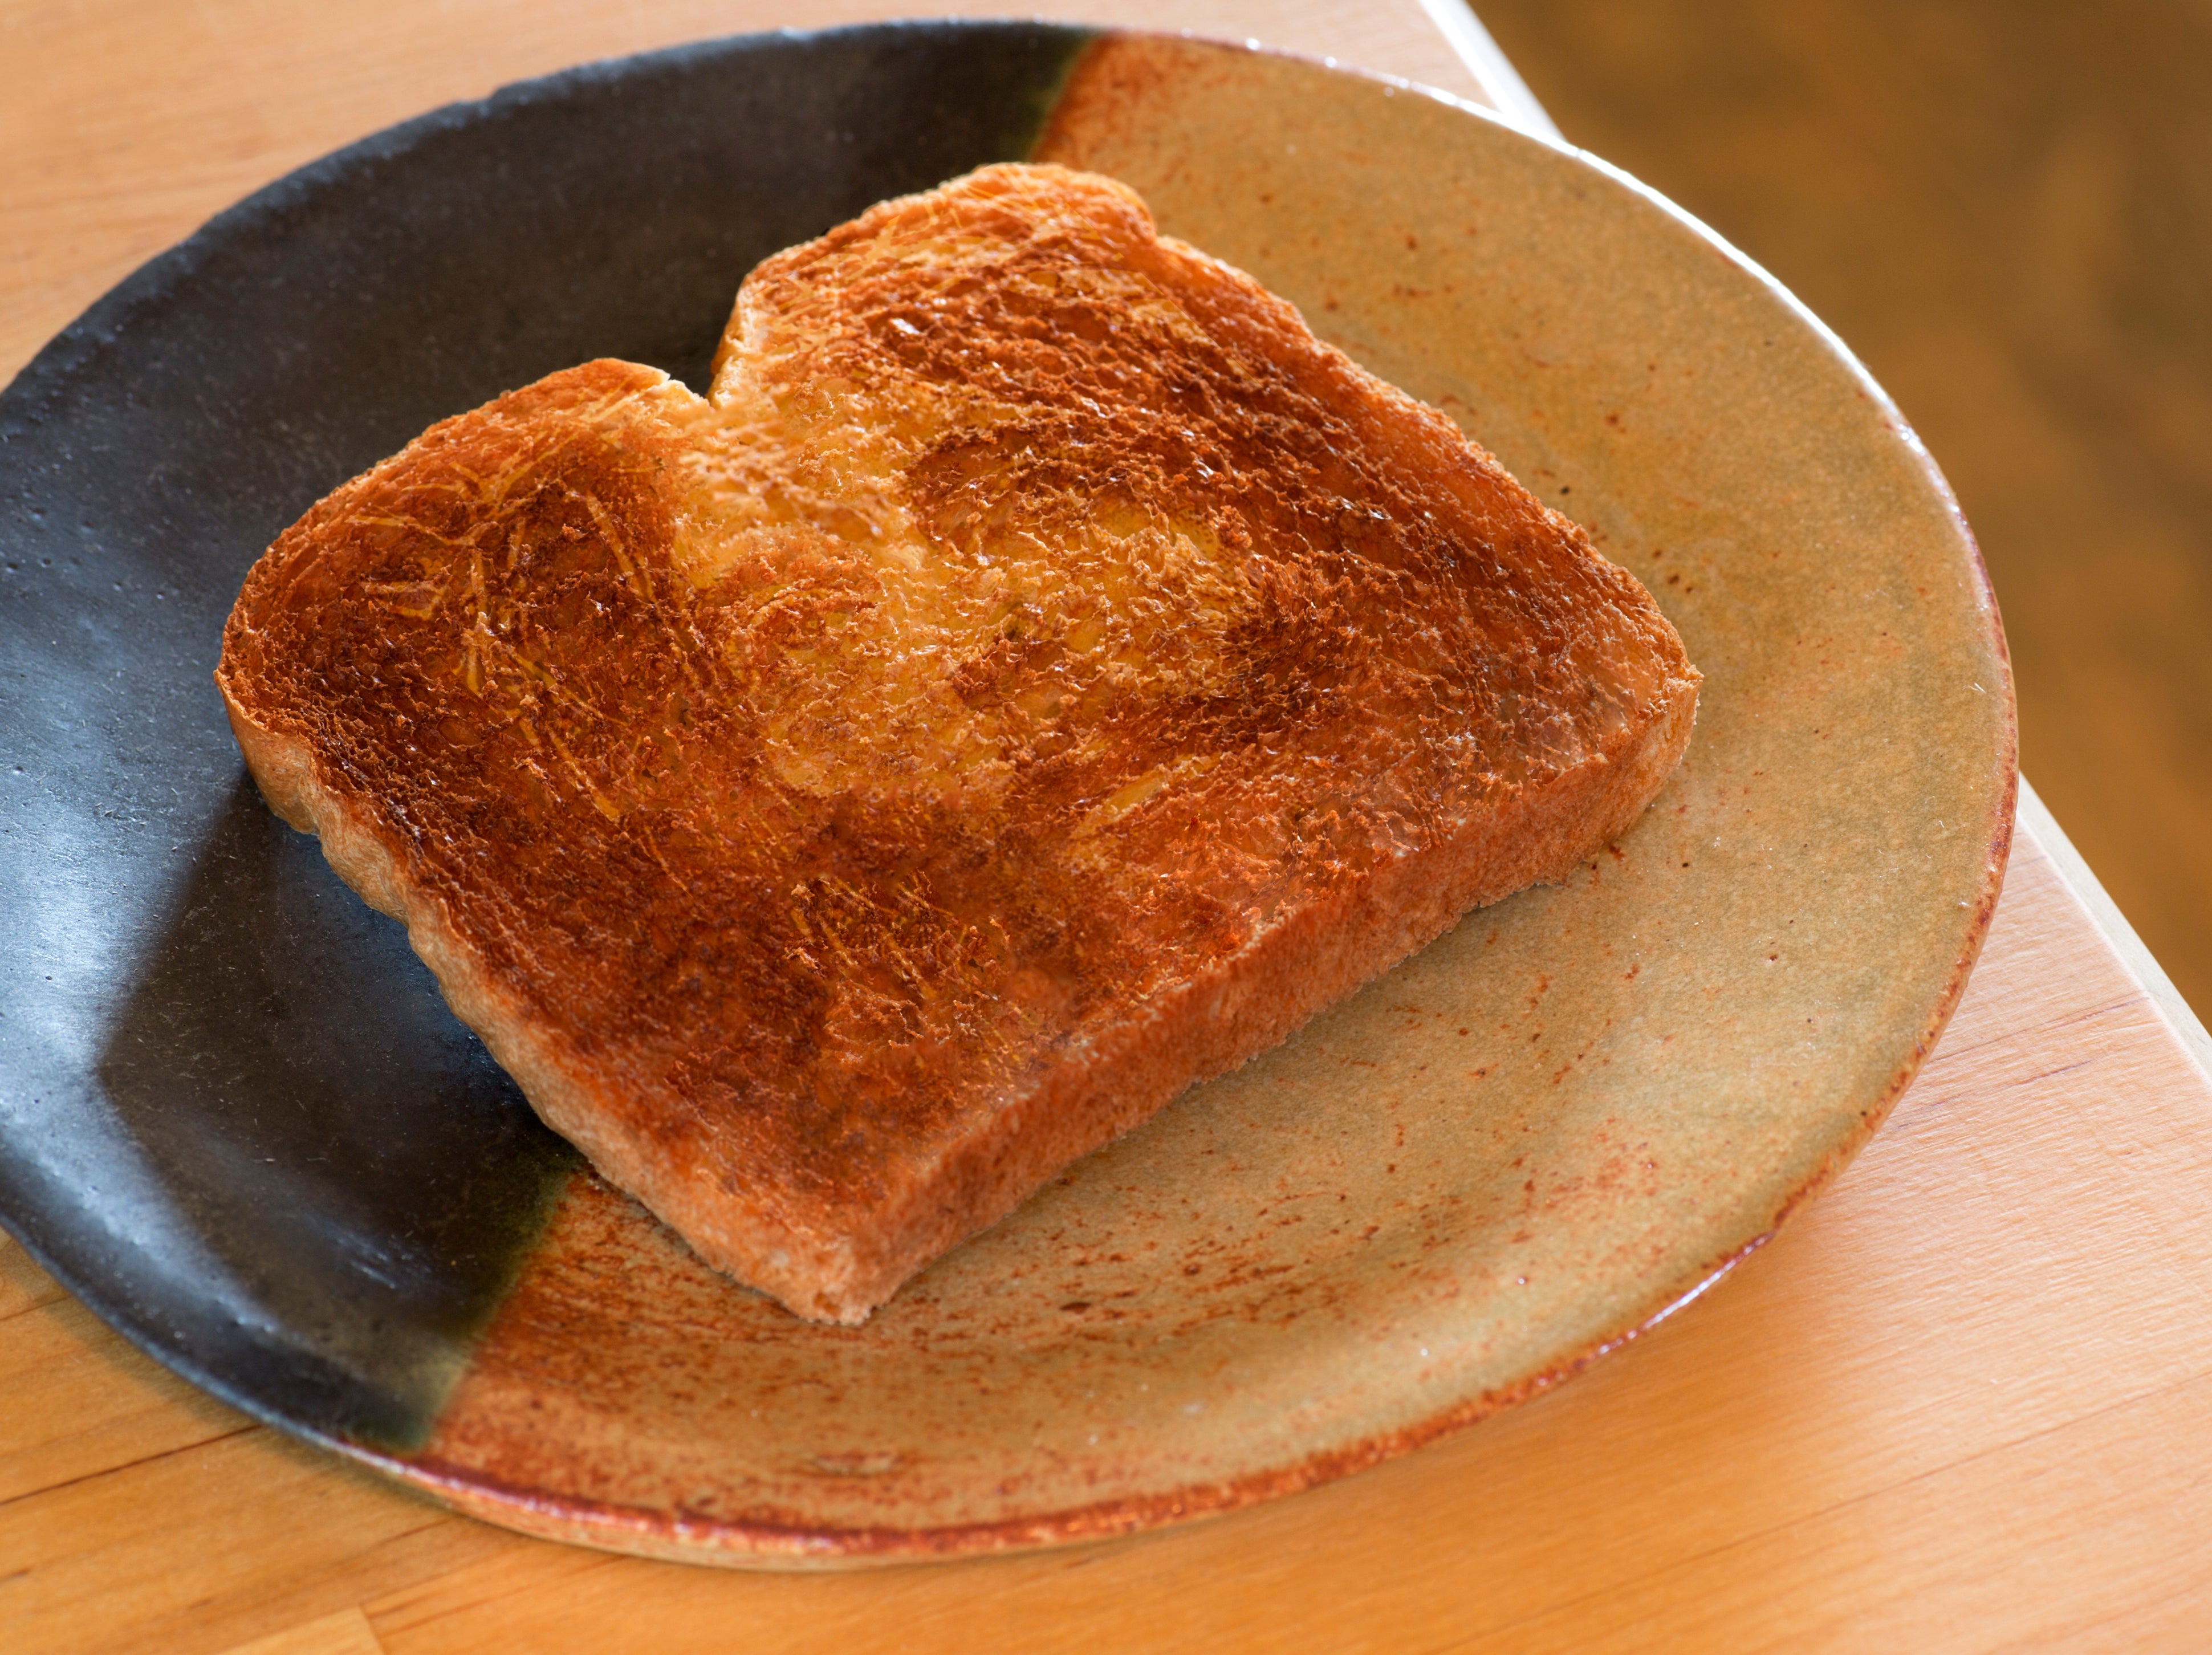 A burnt piece of toast, or an image of Jesus – our brains are hardwired to to notice expressions in all kinds of places